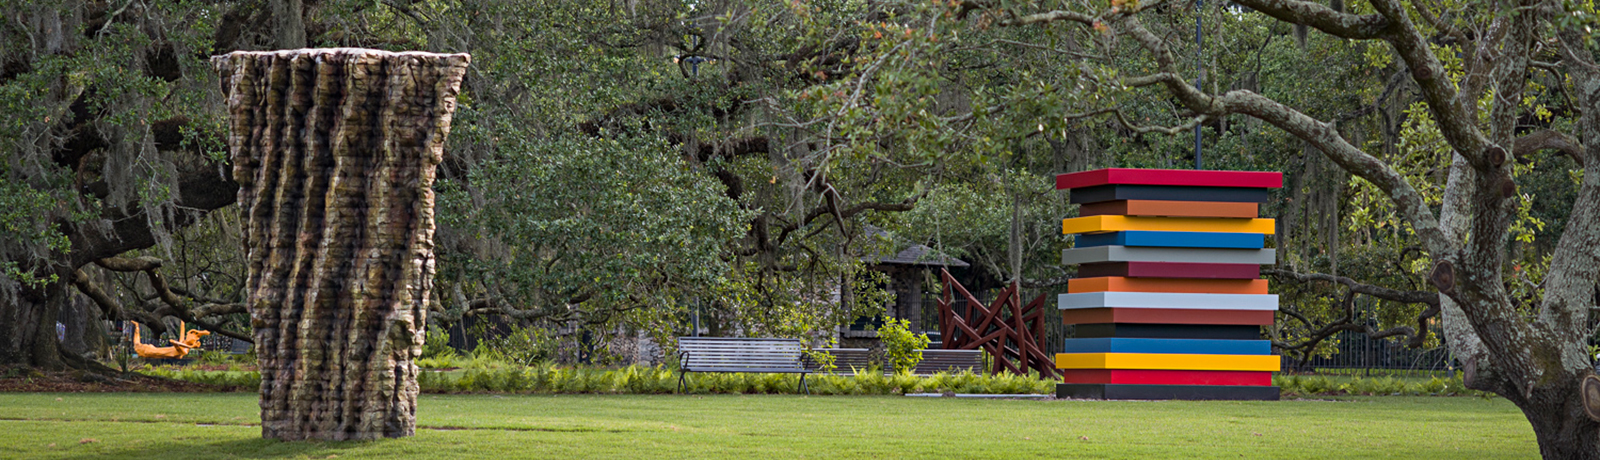 Stroll among more than 90 works of art in a picturesque Louisiana landscape.
